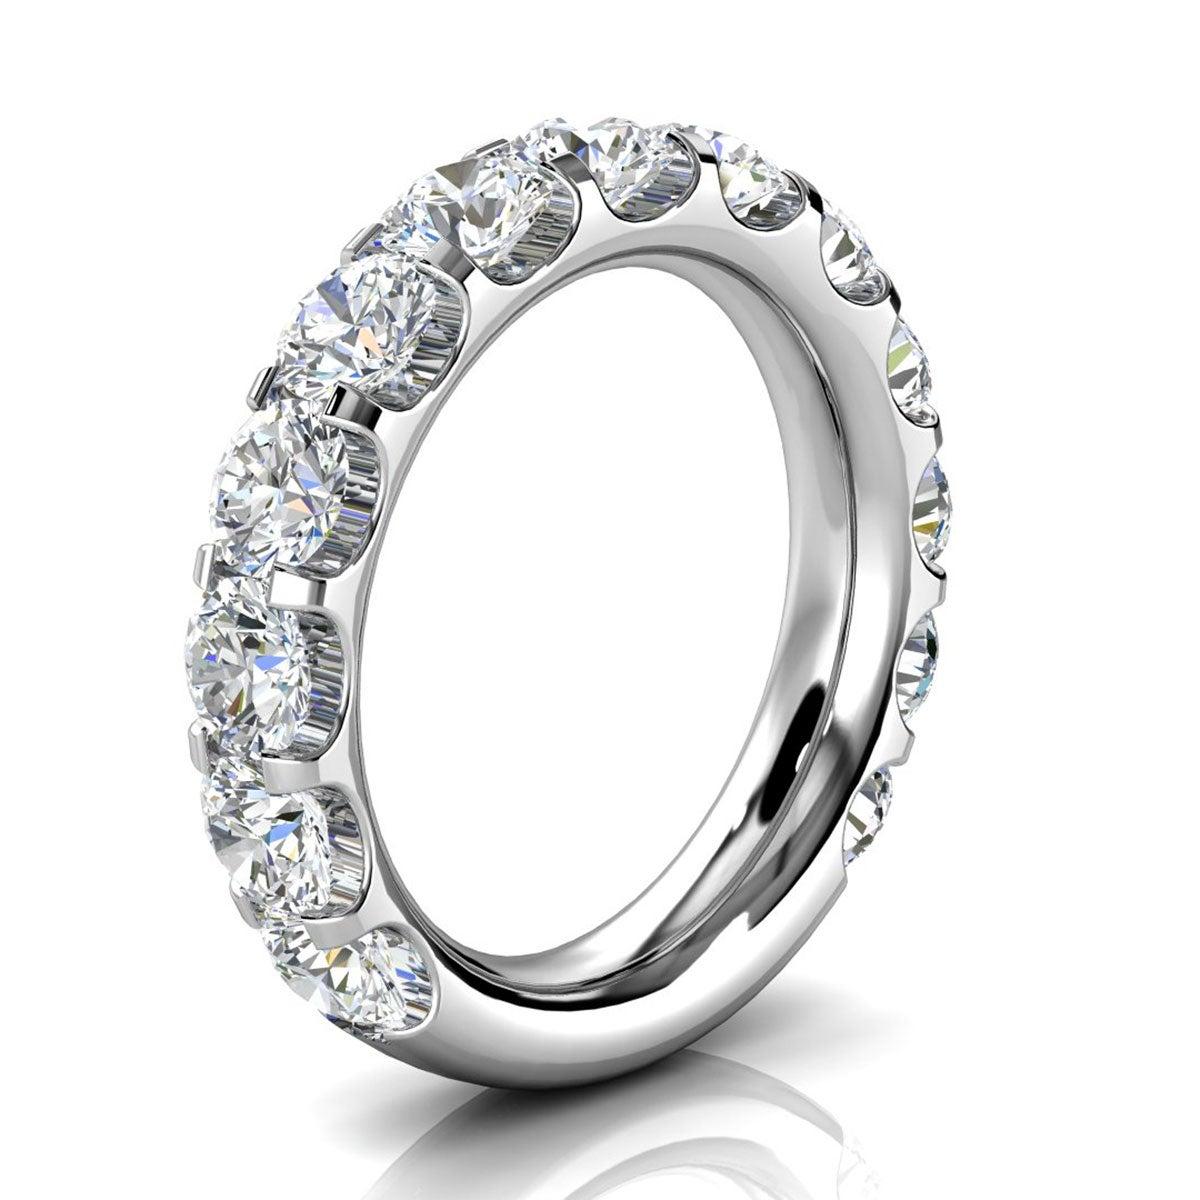 For Sale:  Platinum Micro-Prong Diamond Ring '3 Ct. Tw' 2